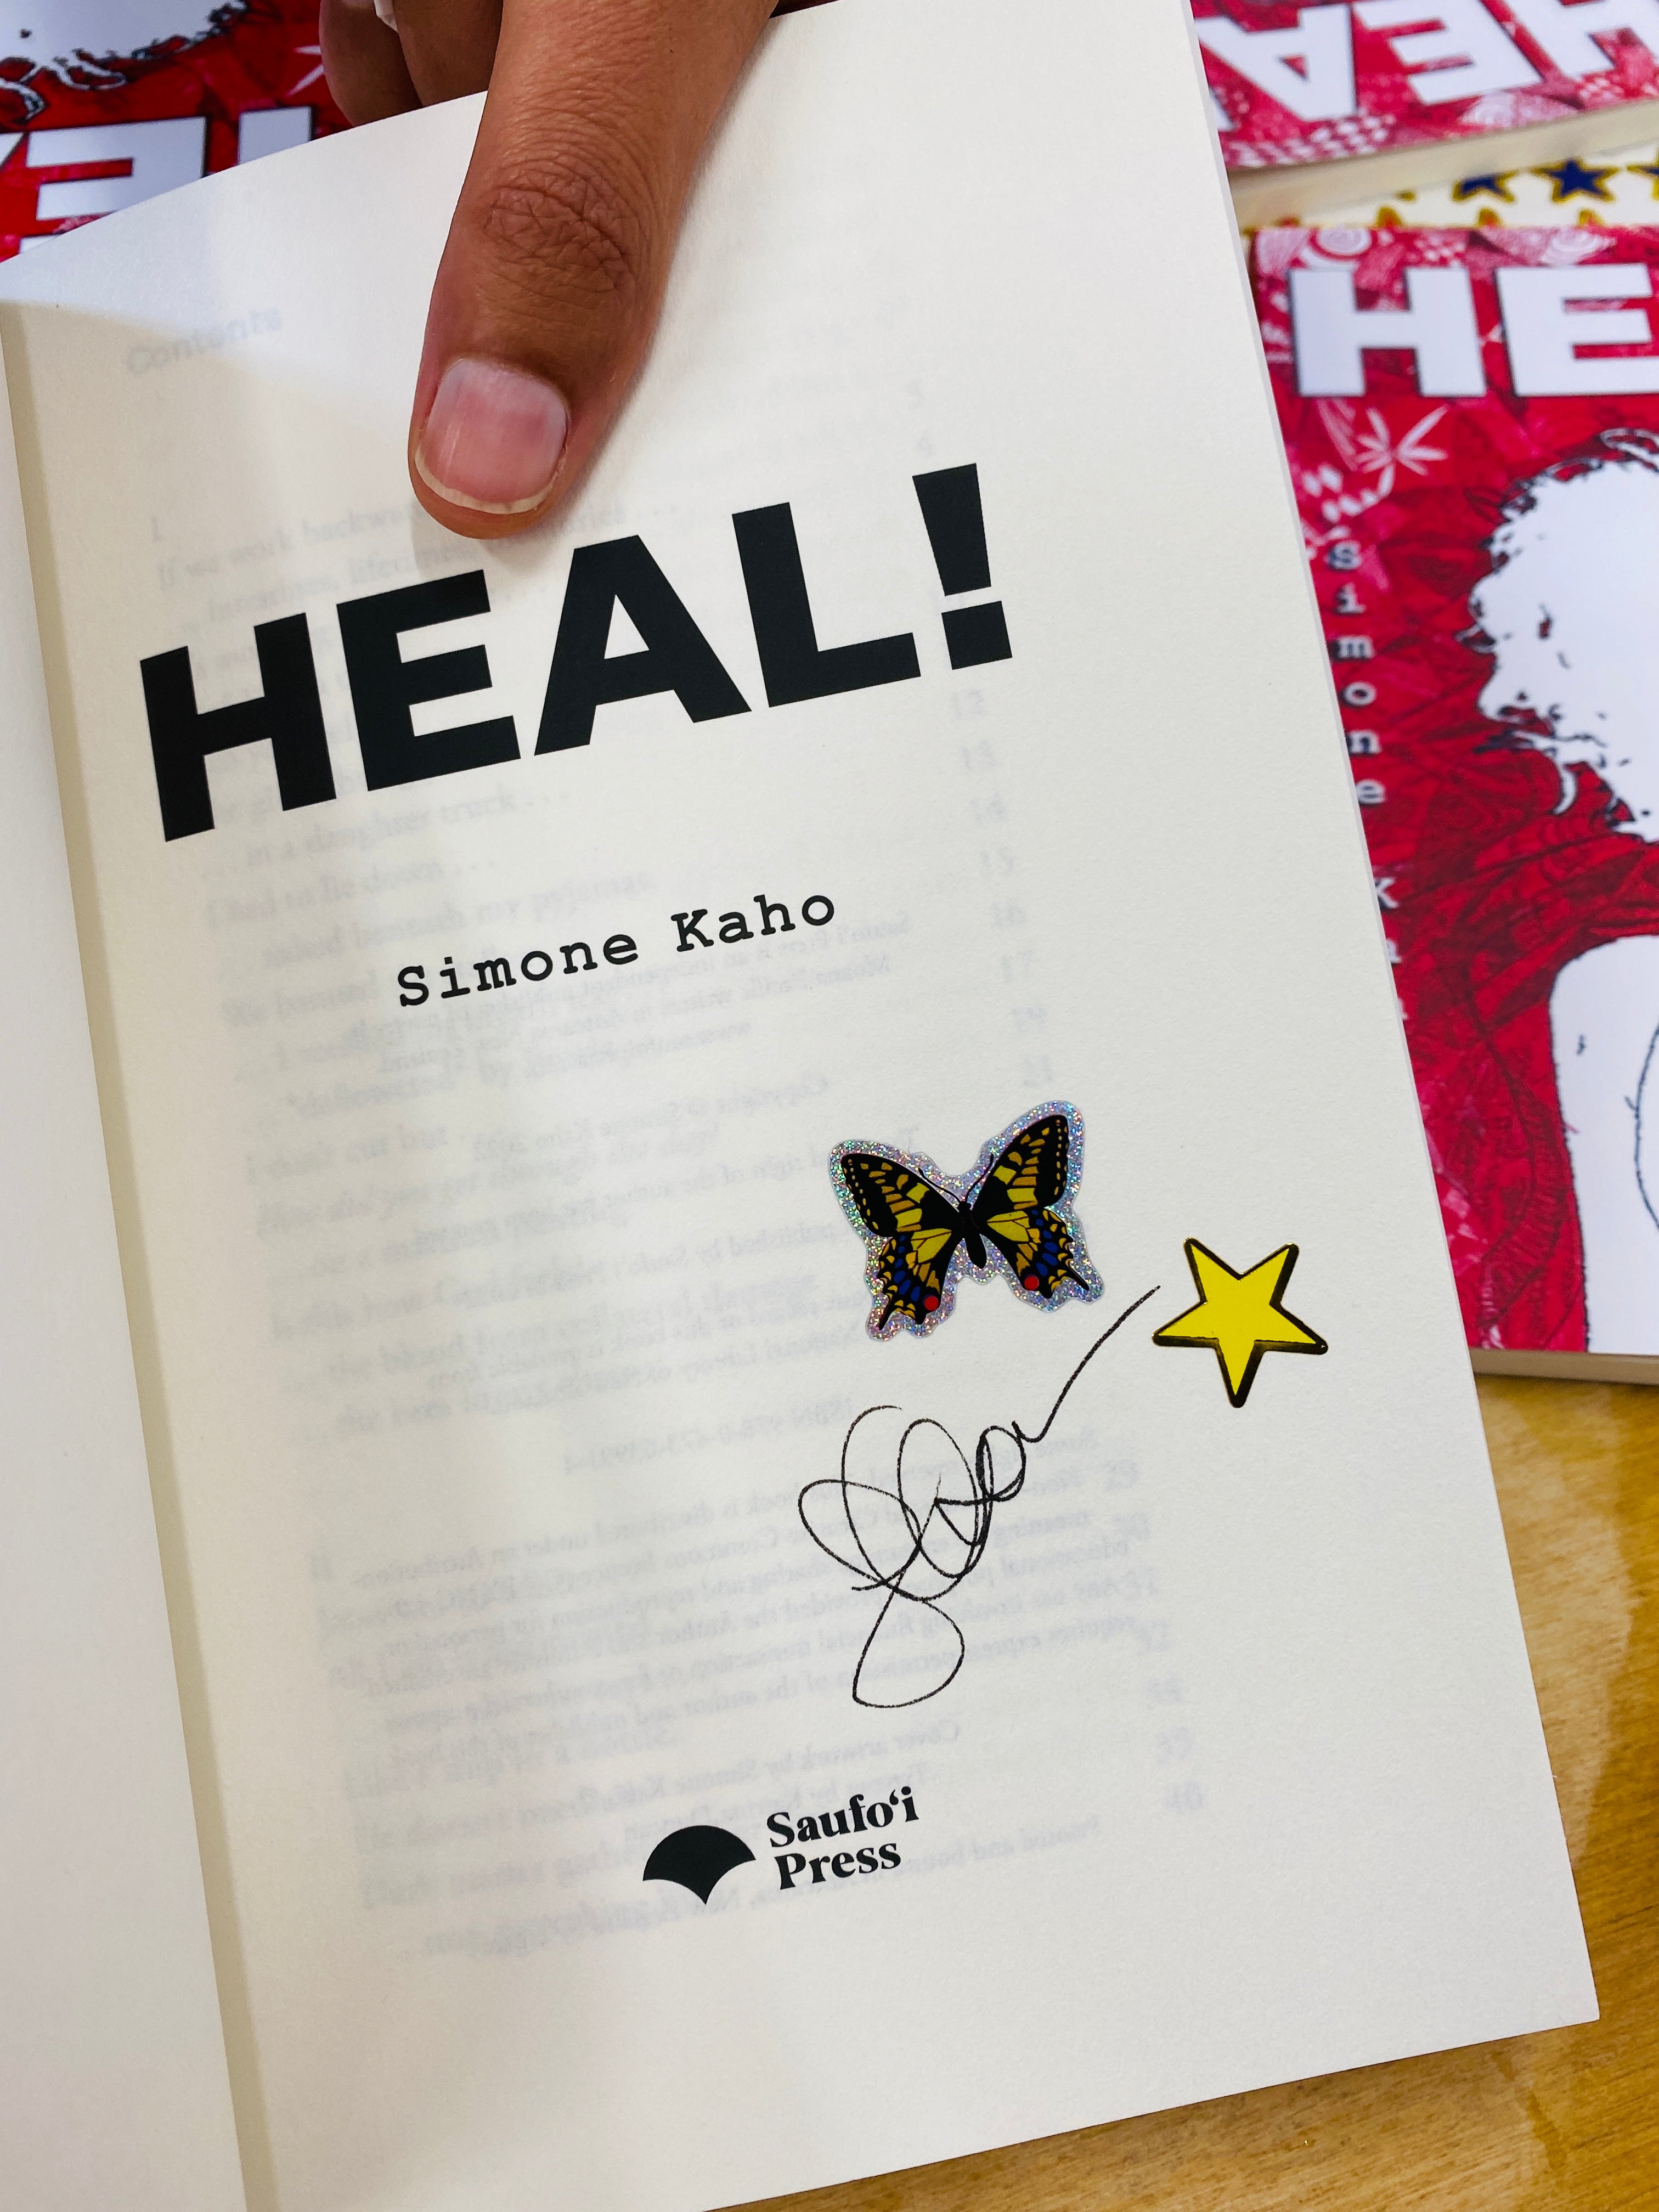 HEAL! by Simone Kaho (books signed by the author)